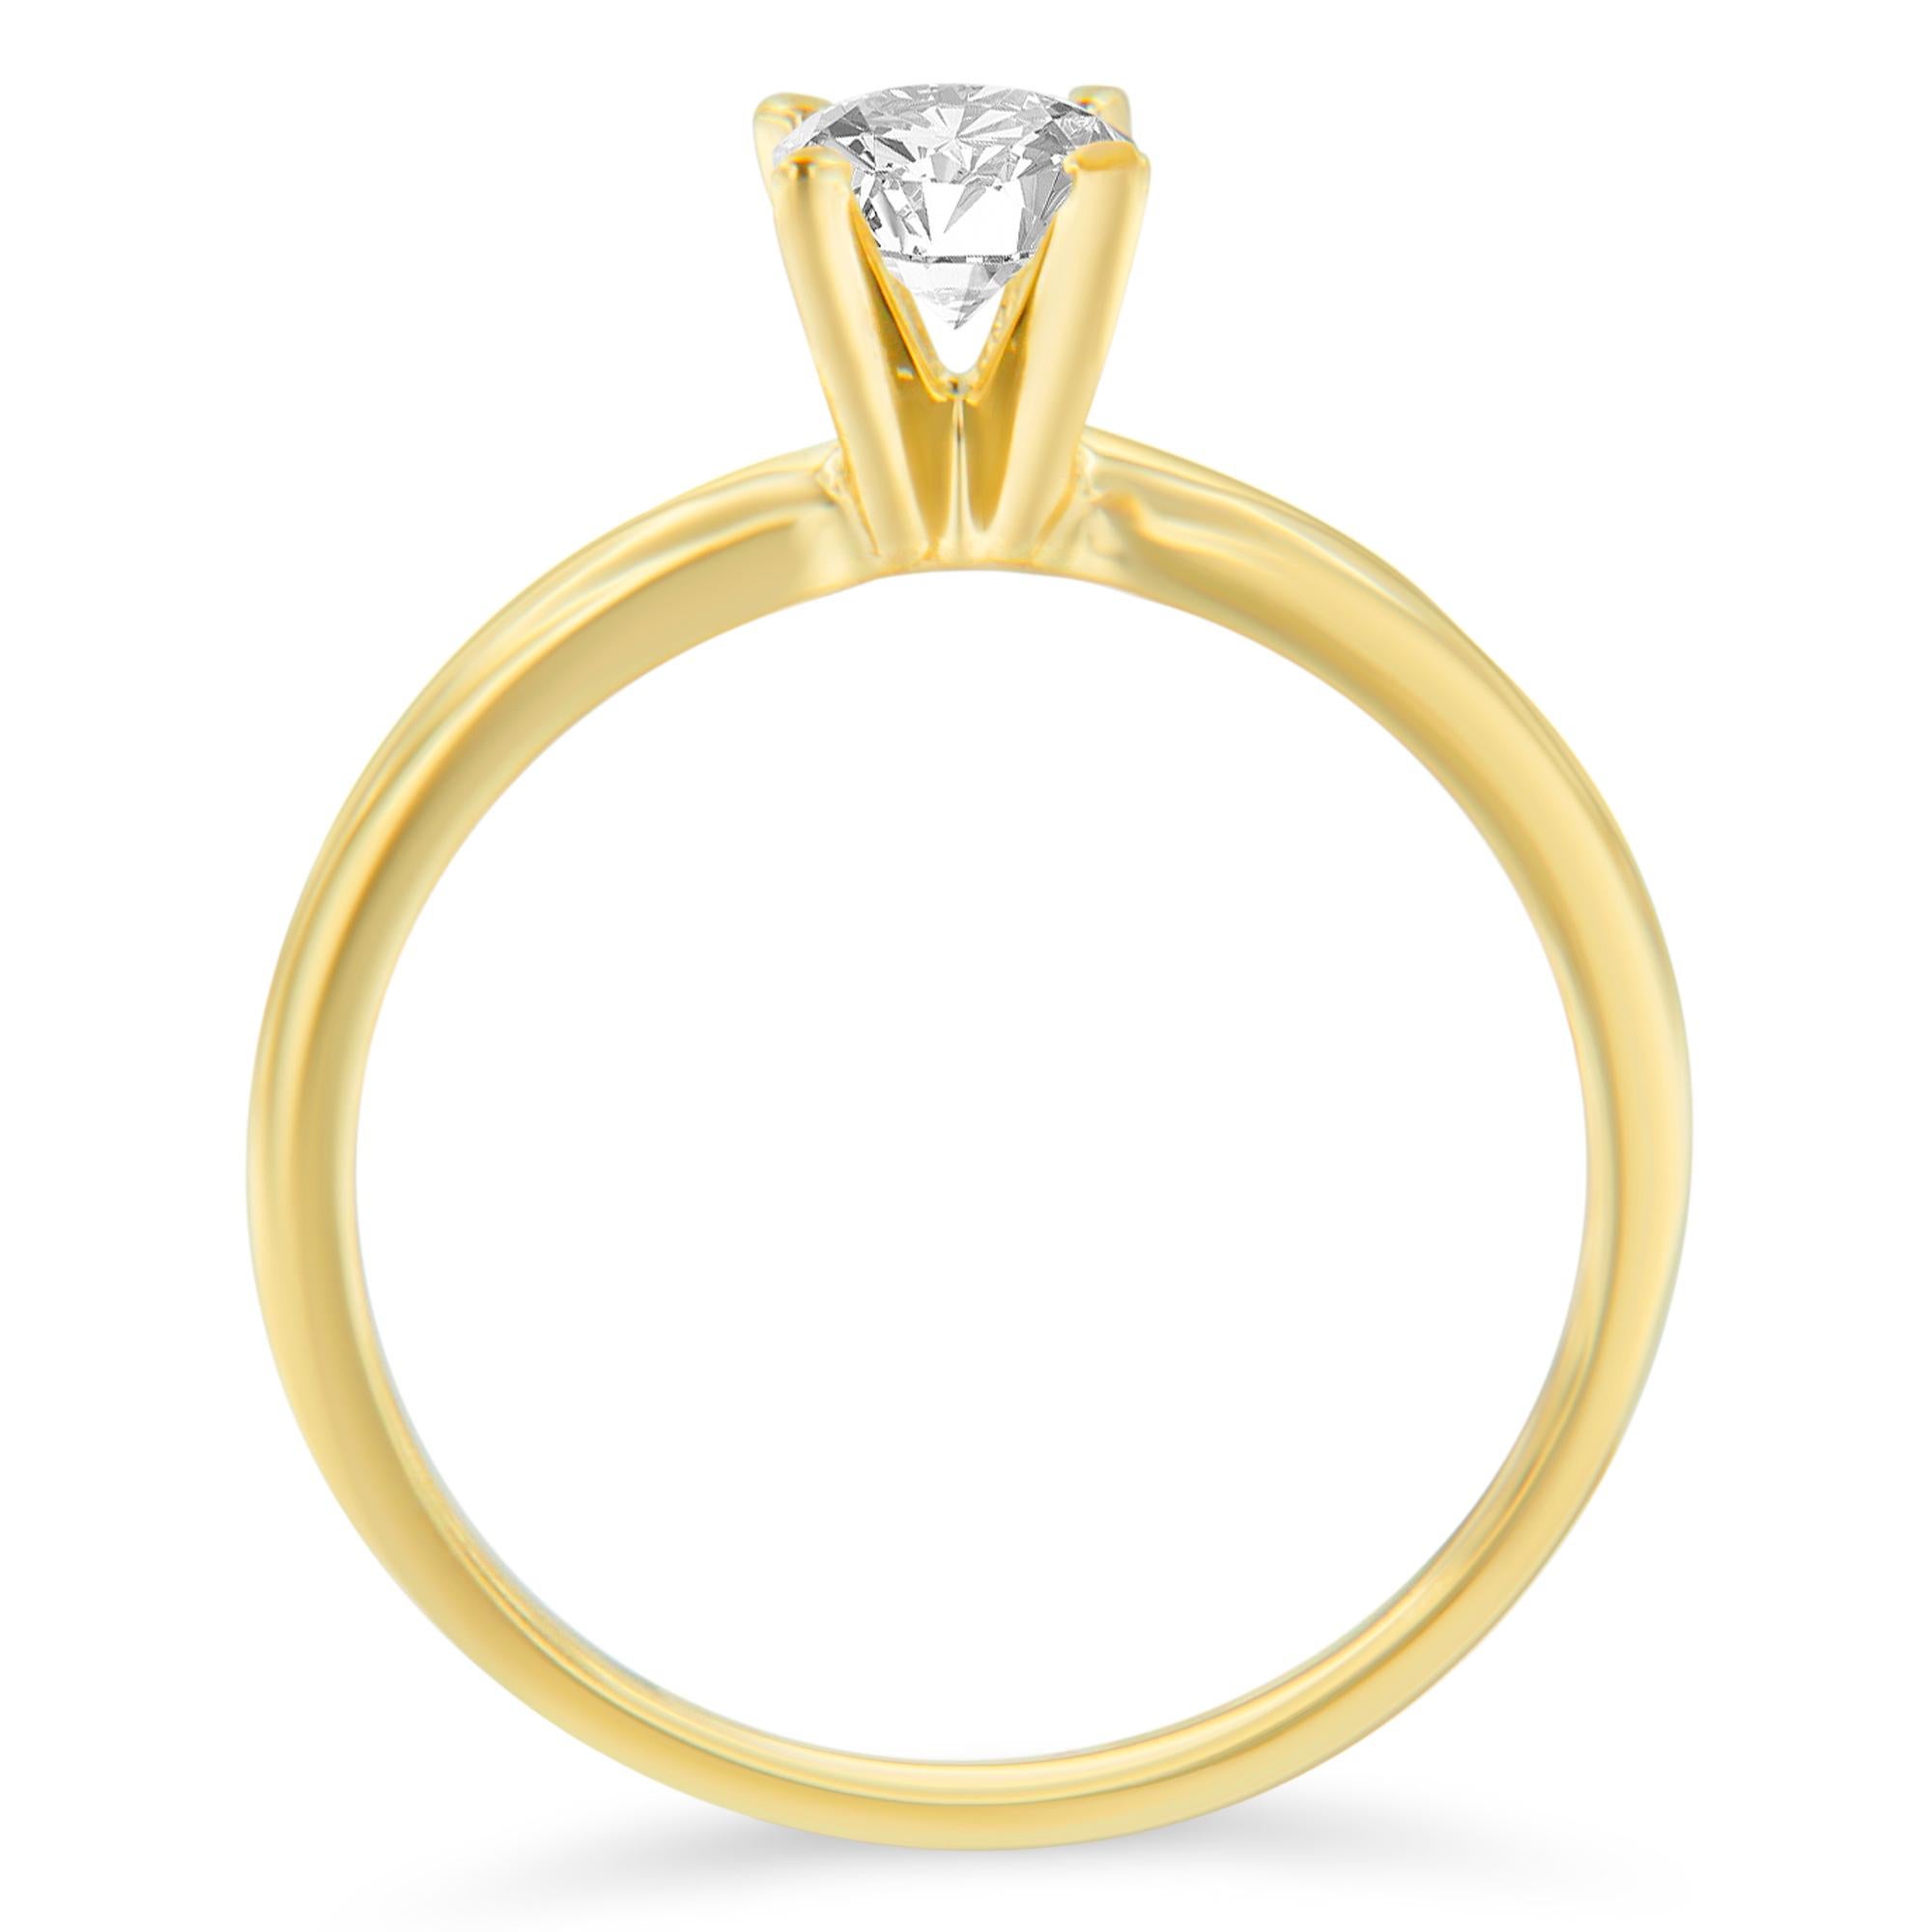 Declare your love to that special someone with this magnificent 1/2 cttw diamond engagement ring. This solitaire ring has a 14k yellow gold band that perfectly frames a round-cut diamond in a classic 4-prong setting. This ring will shine bright on